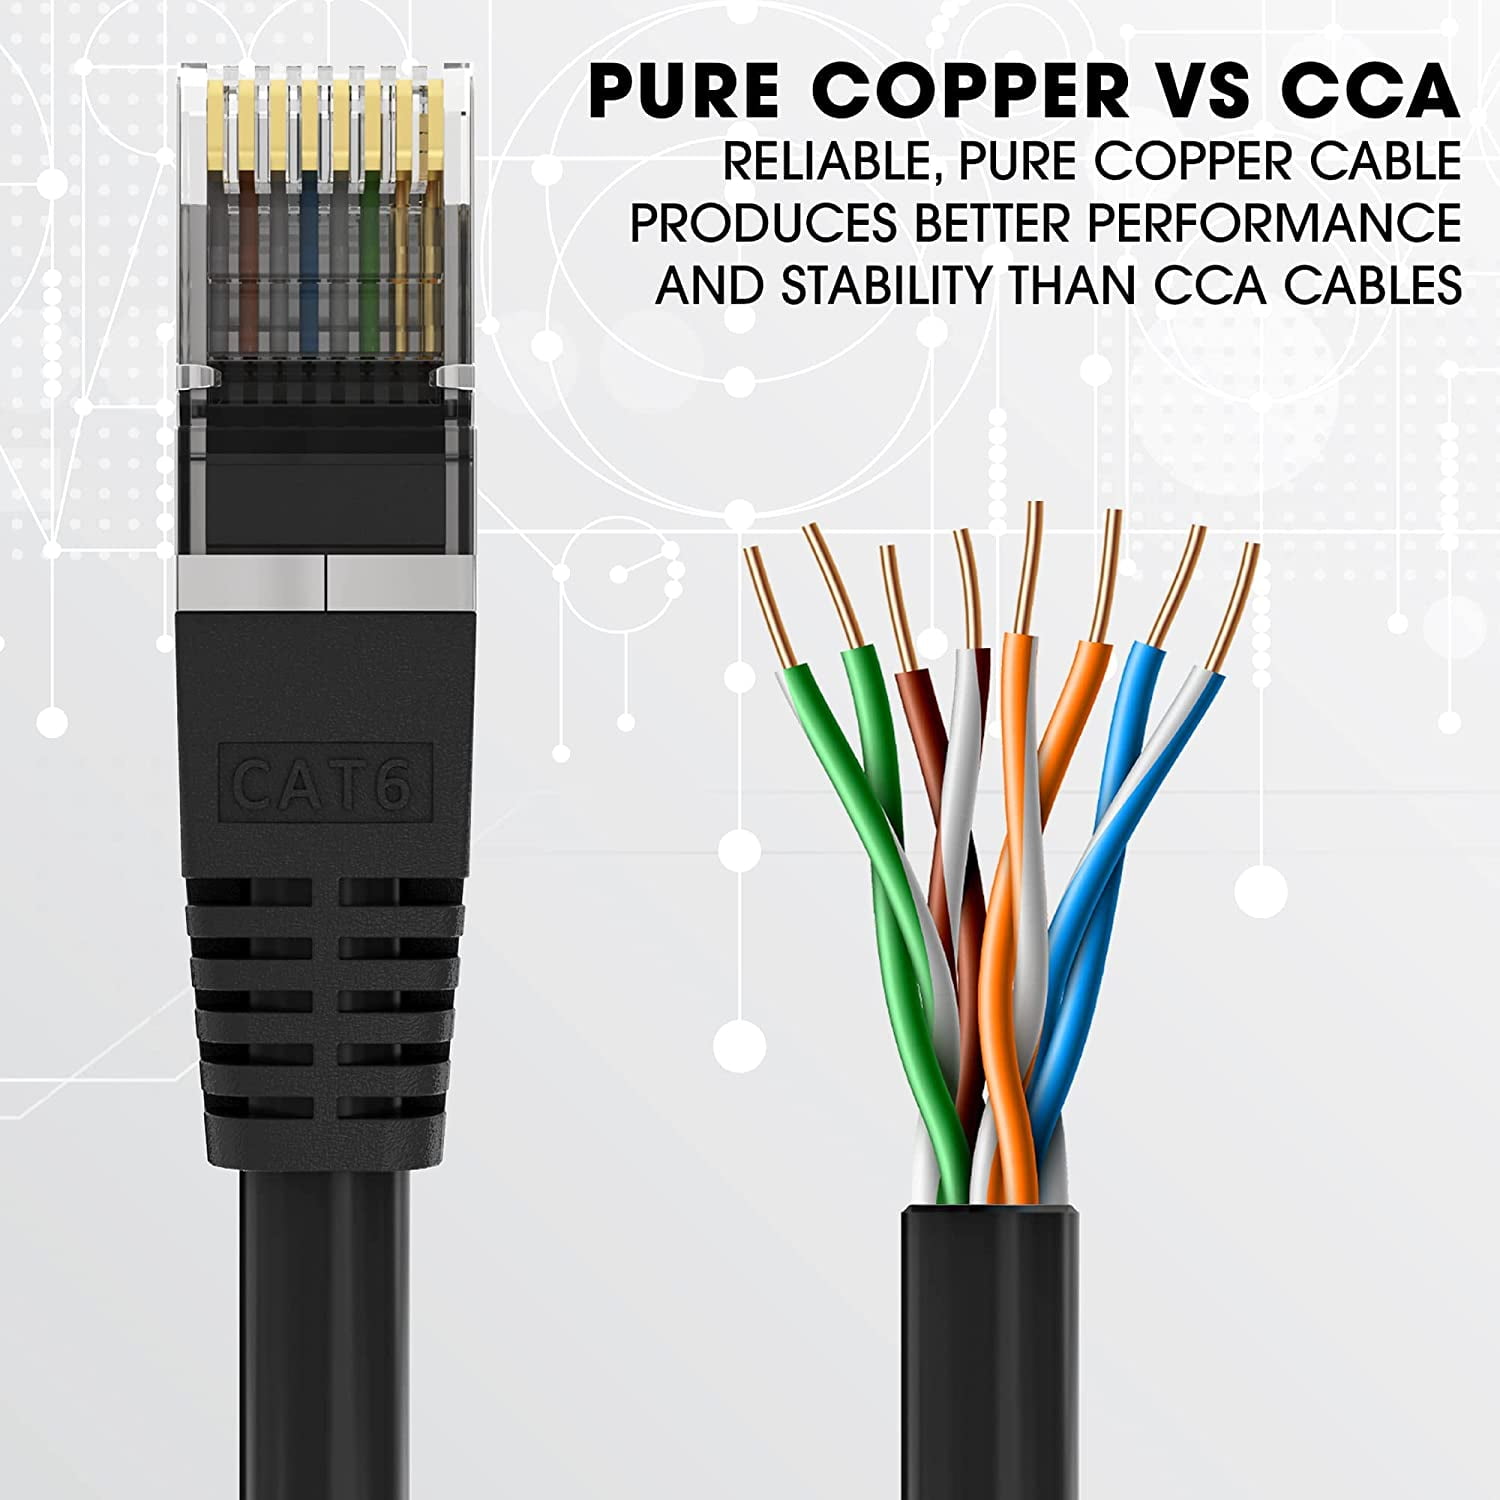 function rg45 cat6 cat7e network cable